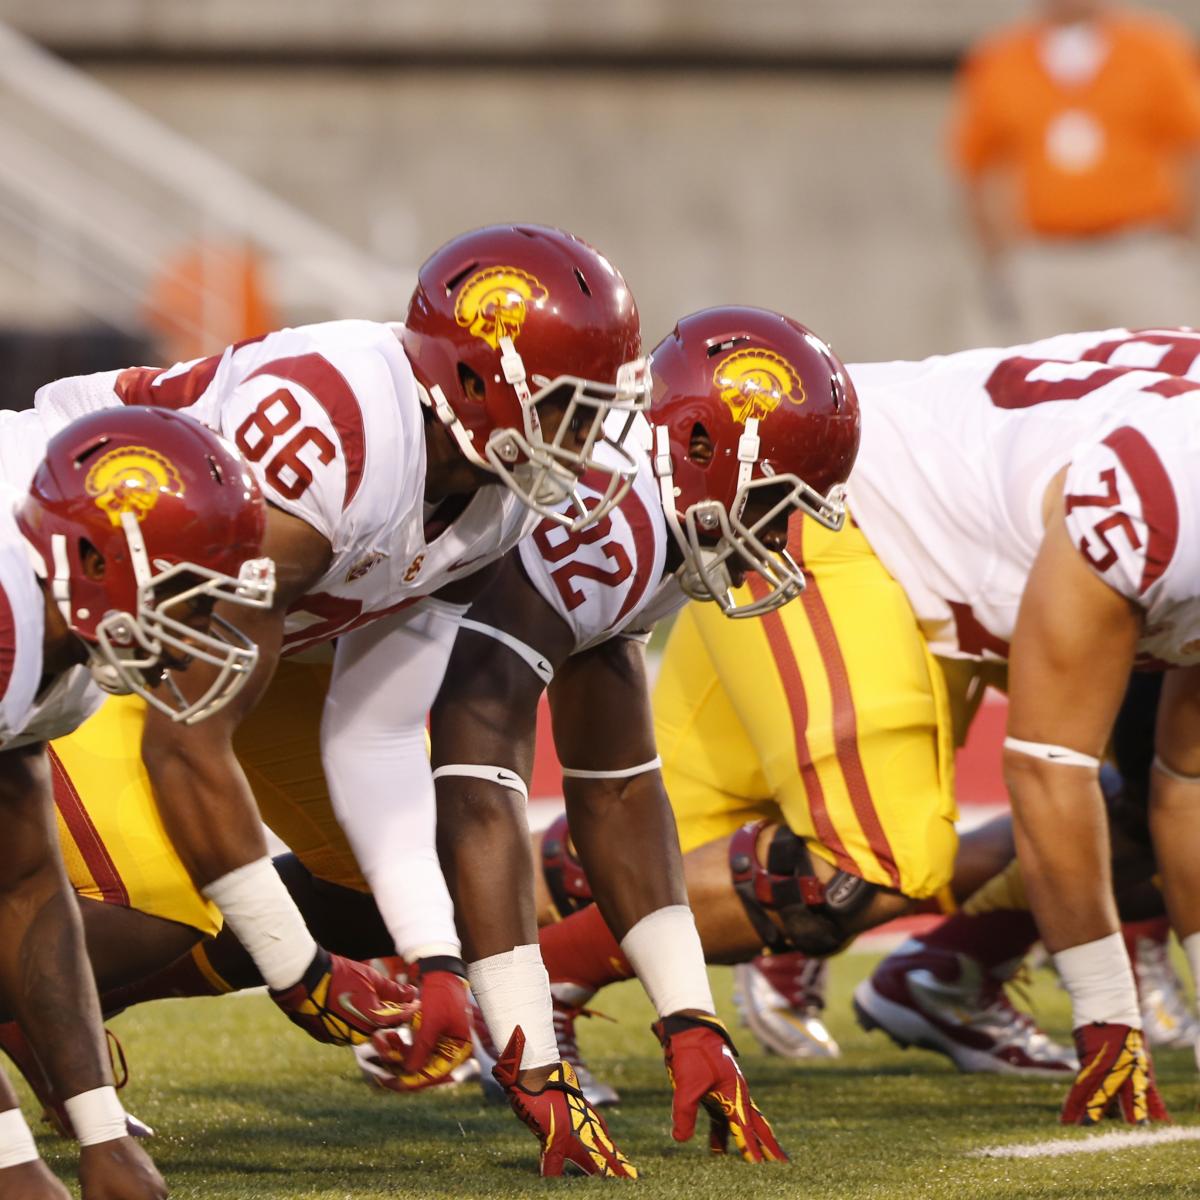 USC Football: 5 Offensive Players with the Most to Gain from Summer Workouts | Bleacher Report